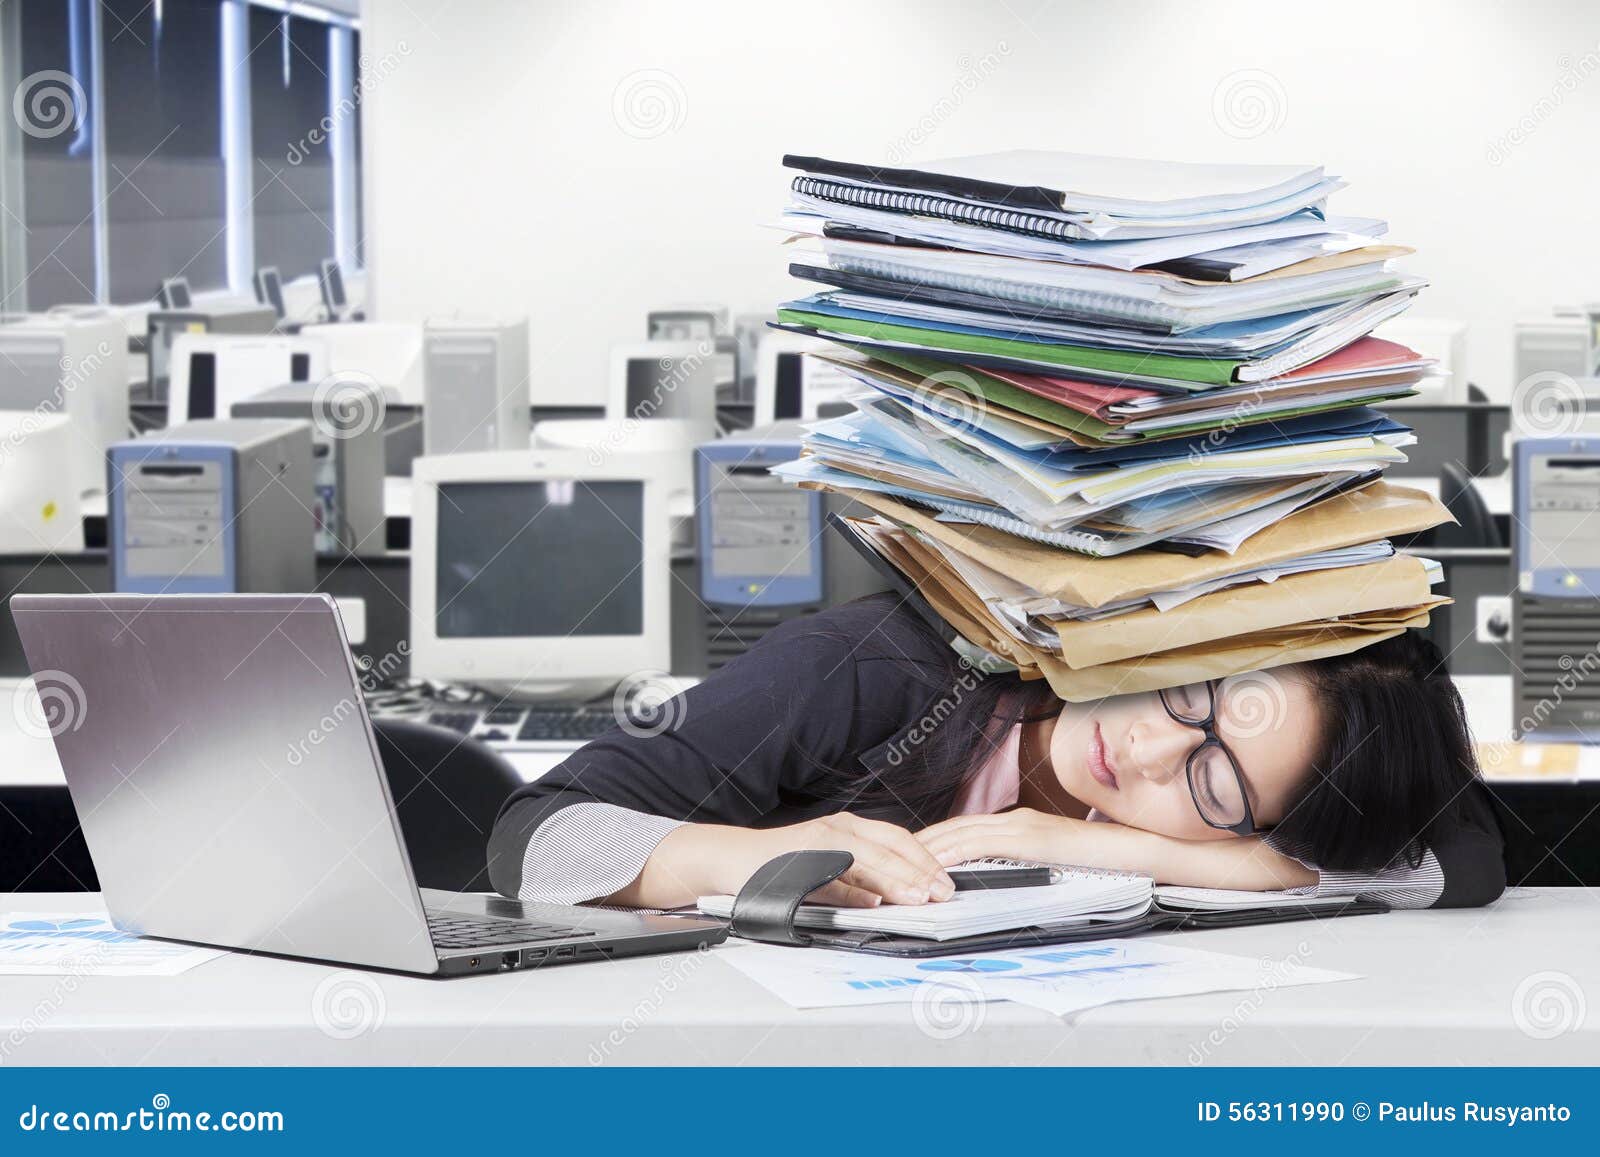 depressed female worker napping on desk